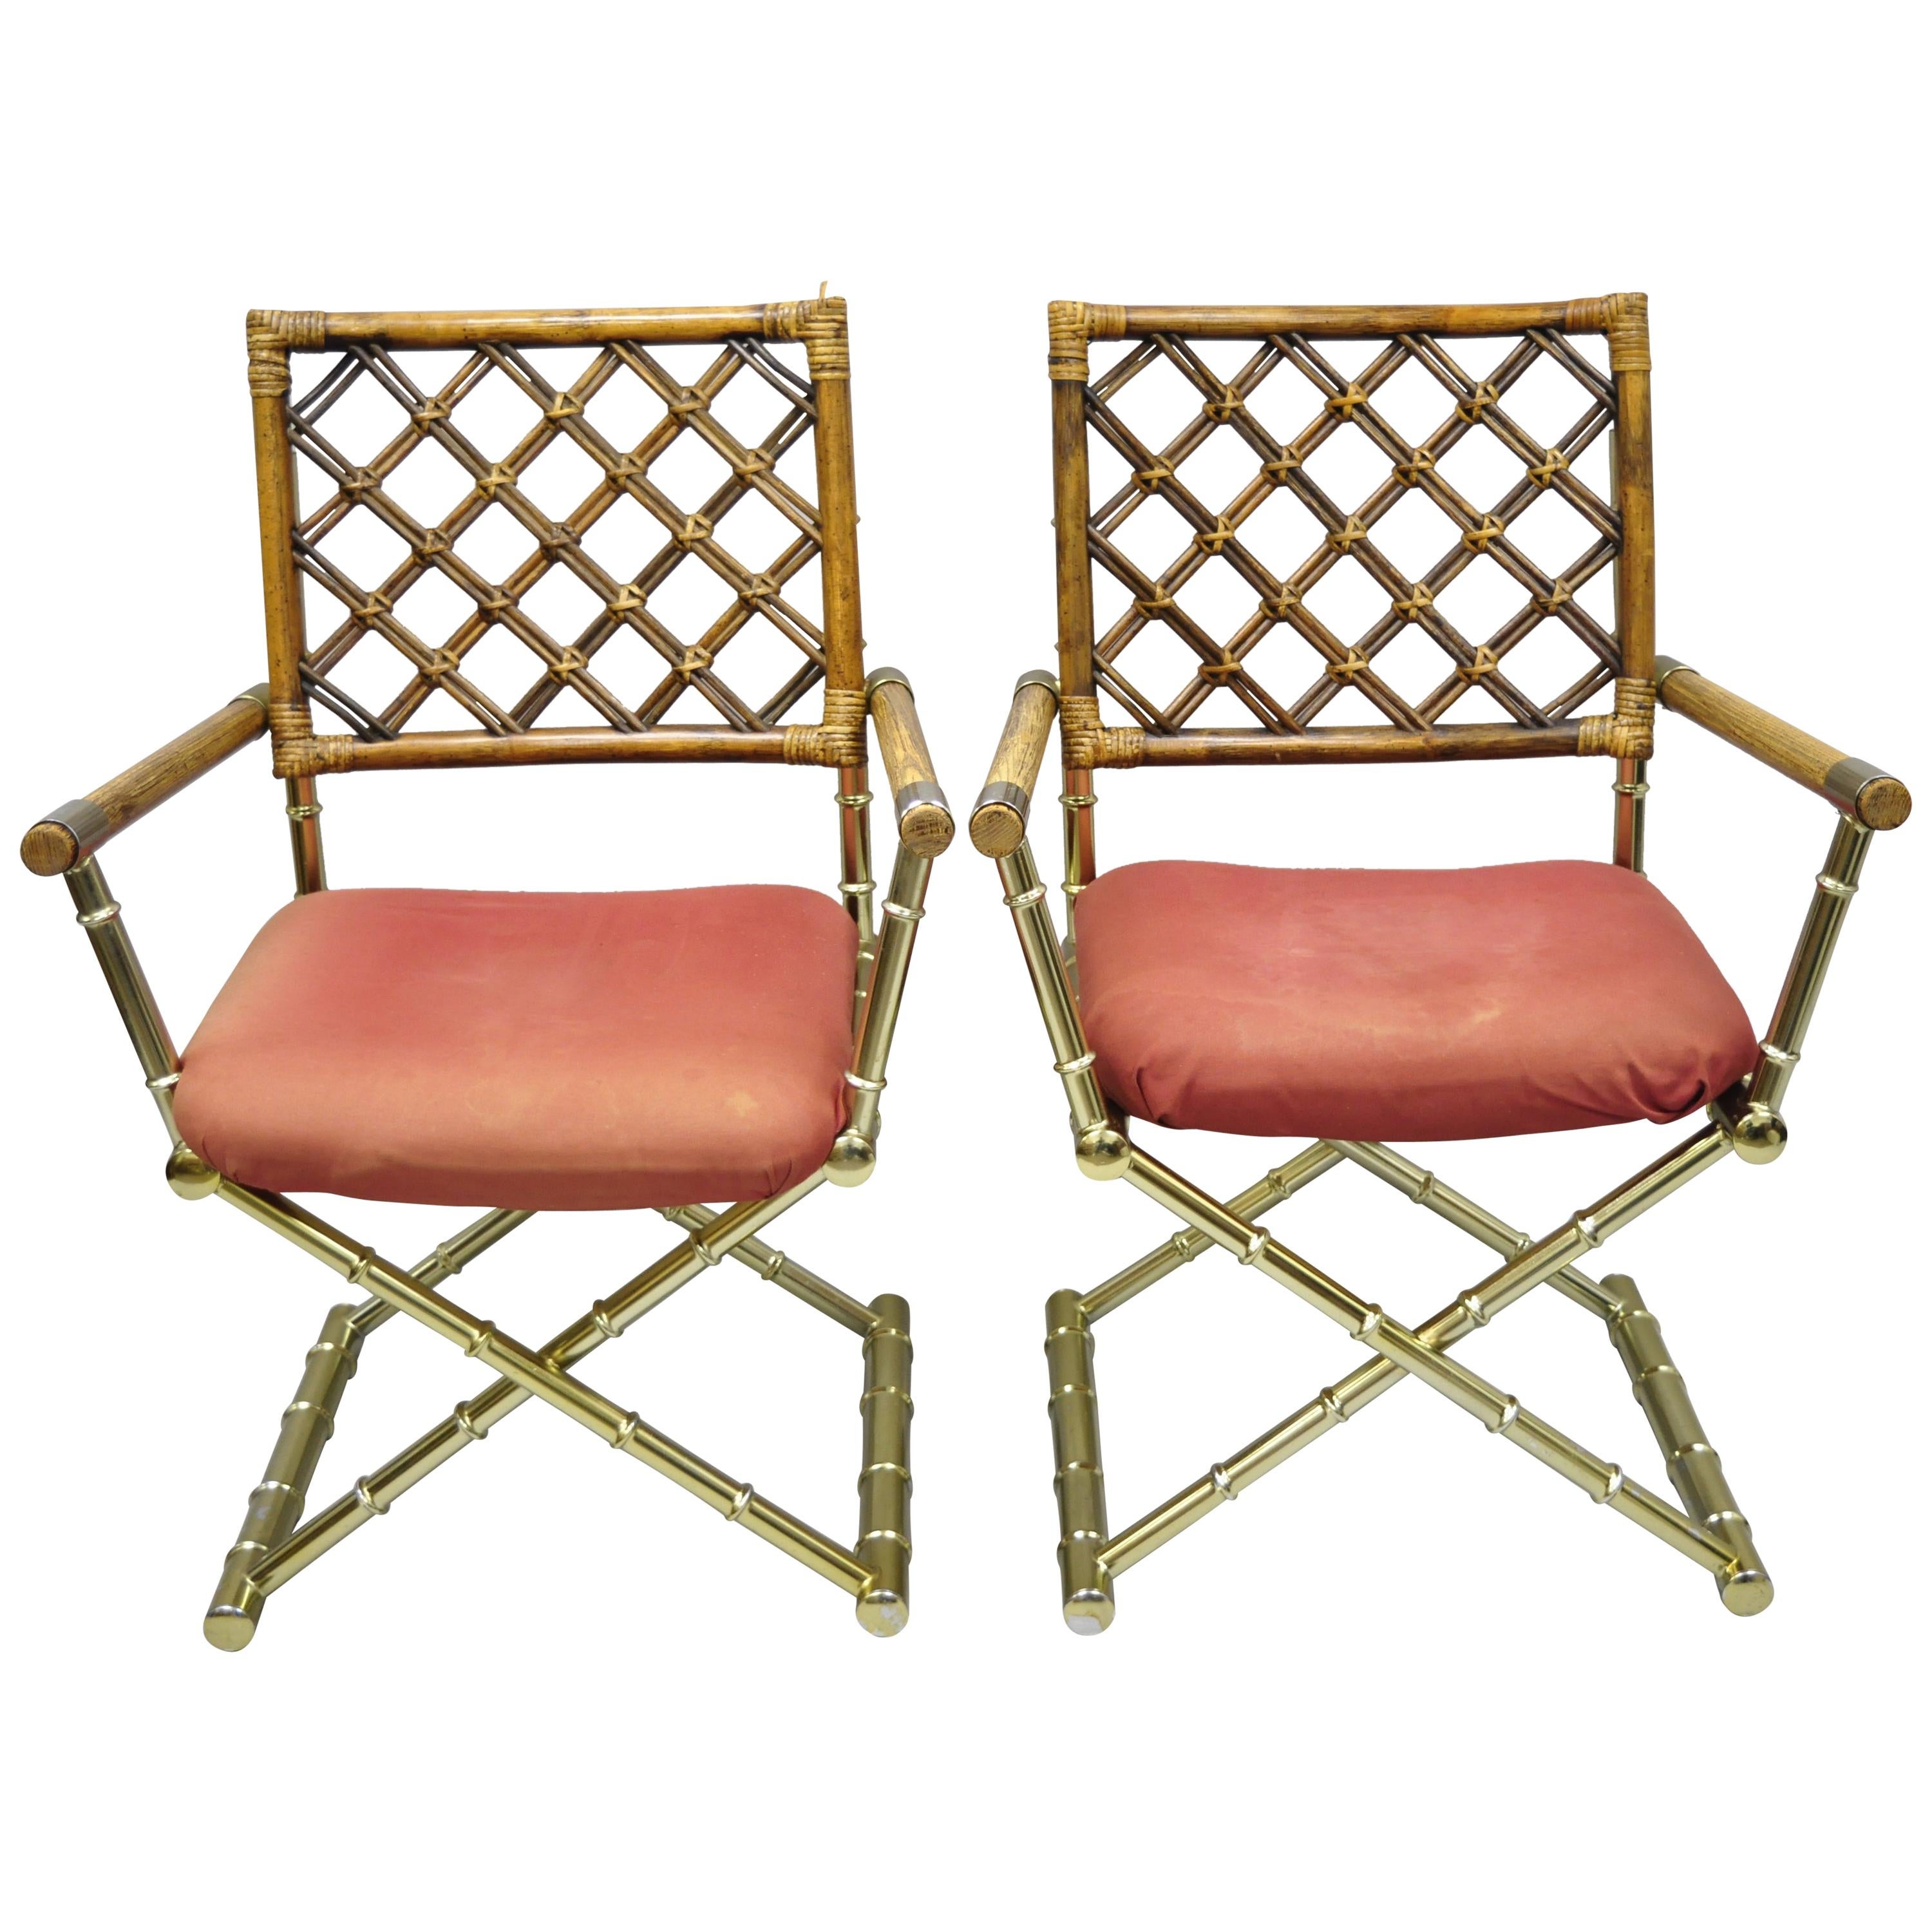 Pair of Vintage Daystrom Brass Faux Bamboo Lattice Rattan Directors Armchairs